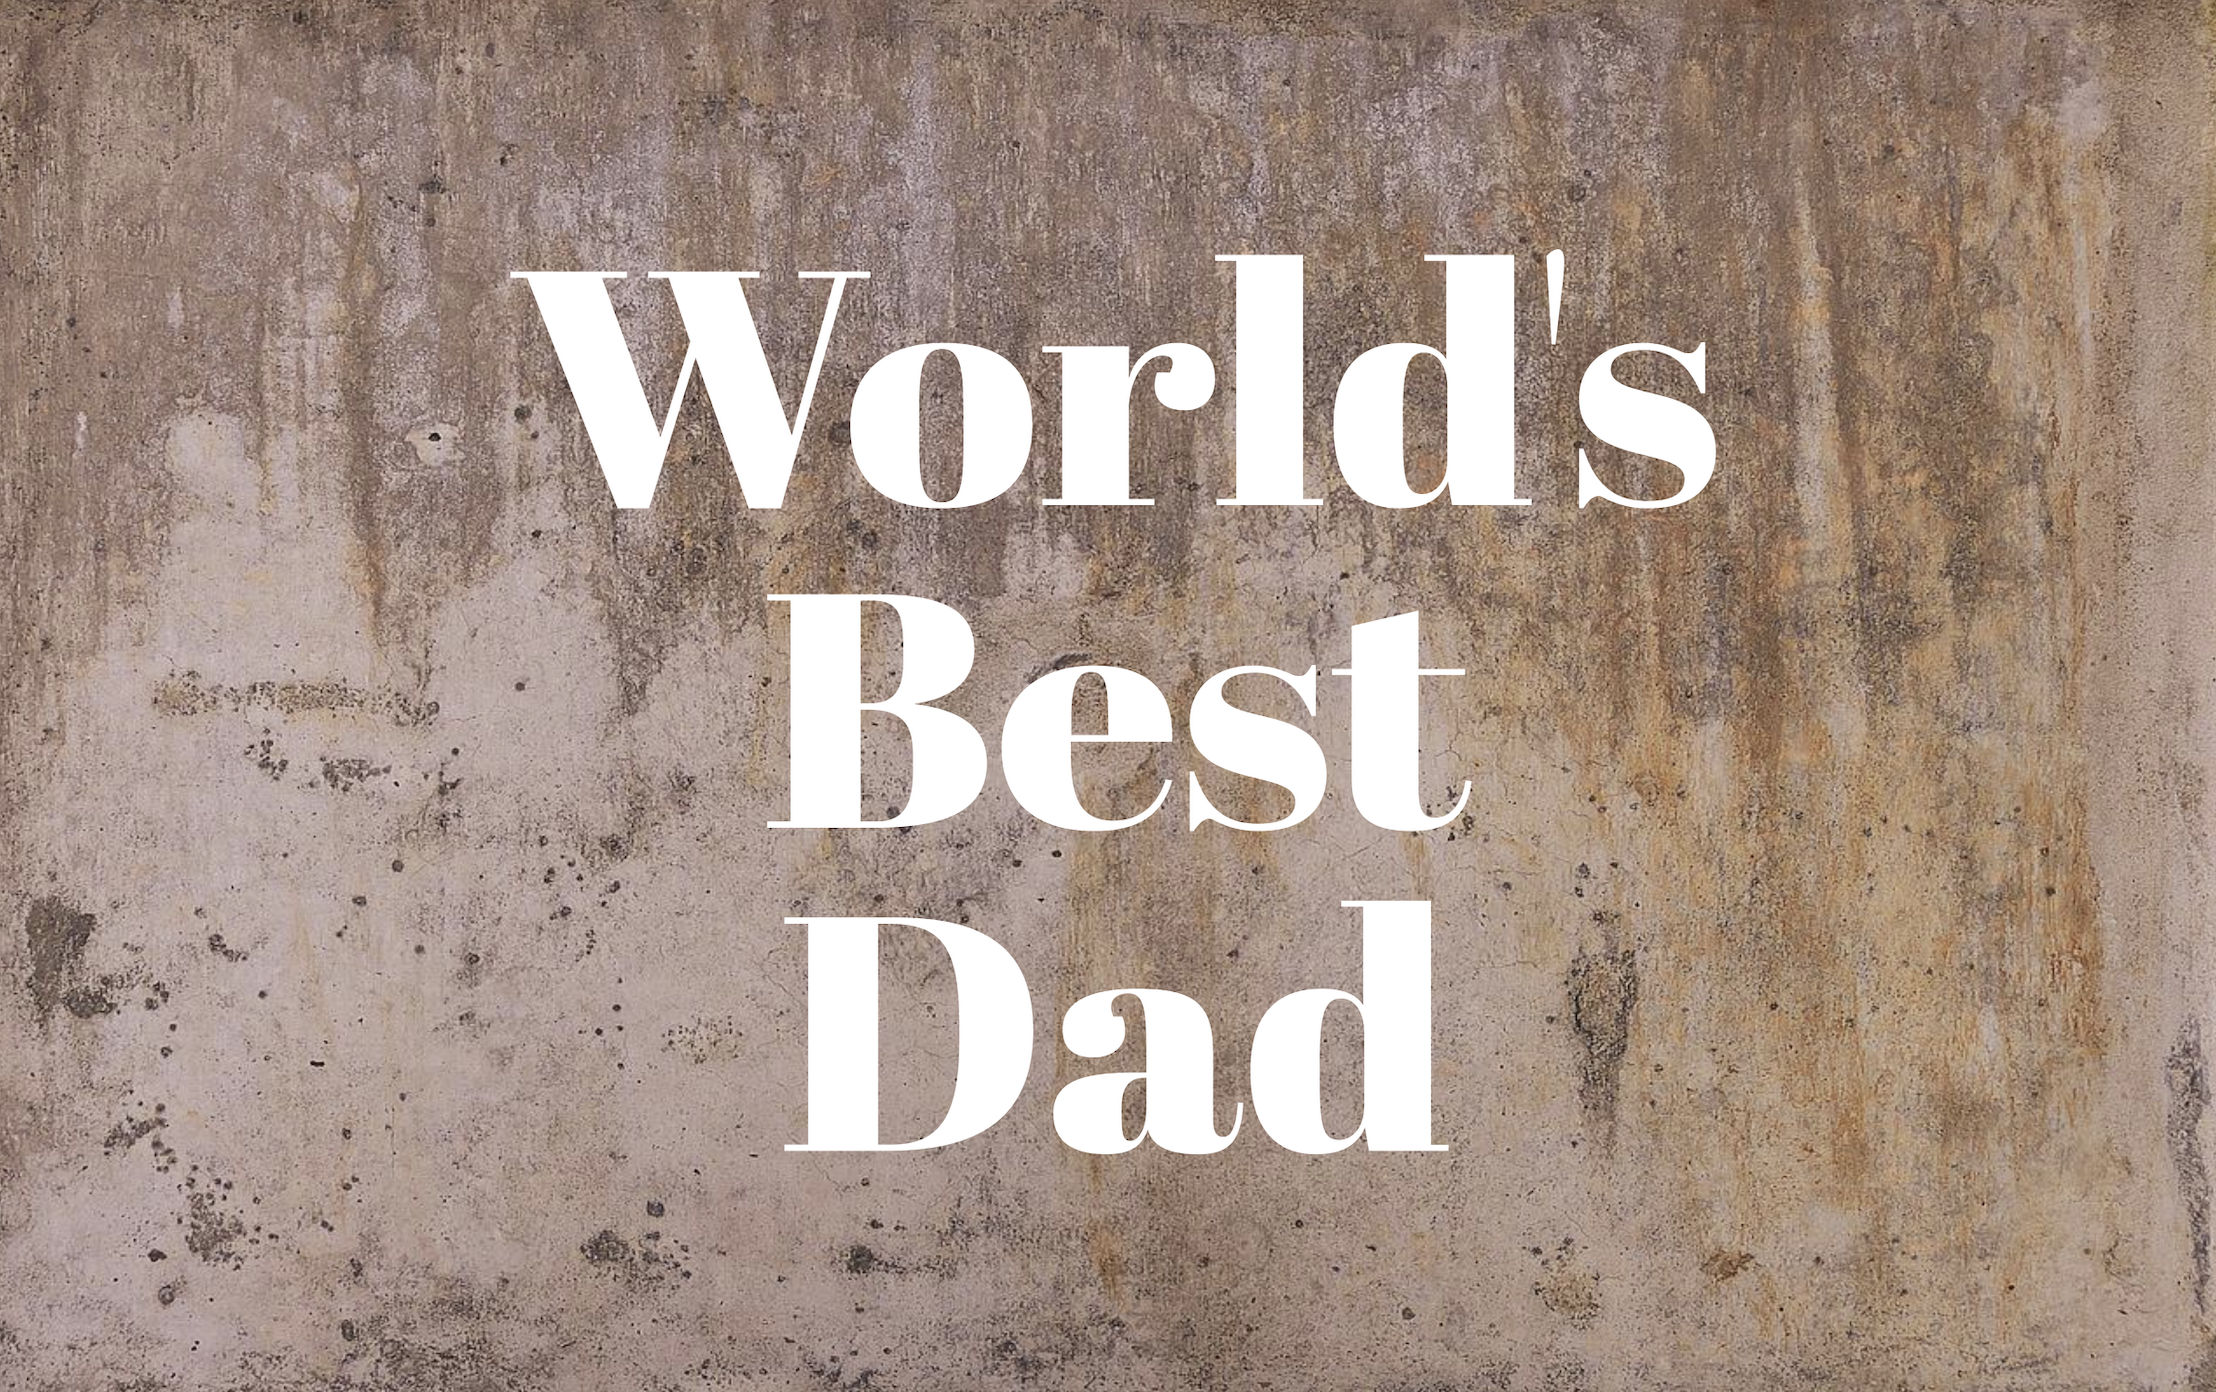 World's Best Dad Decal - Holiday Father/Dad/Dada/Daddy Vinyl Decals for Home, Gifts, Businesses and More!